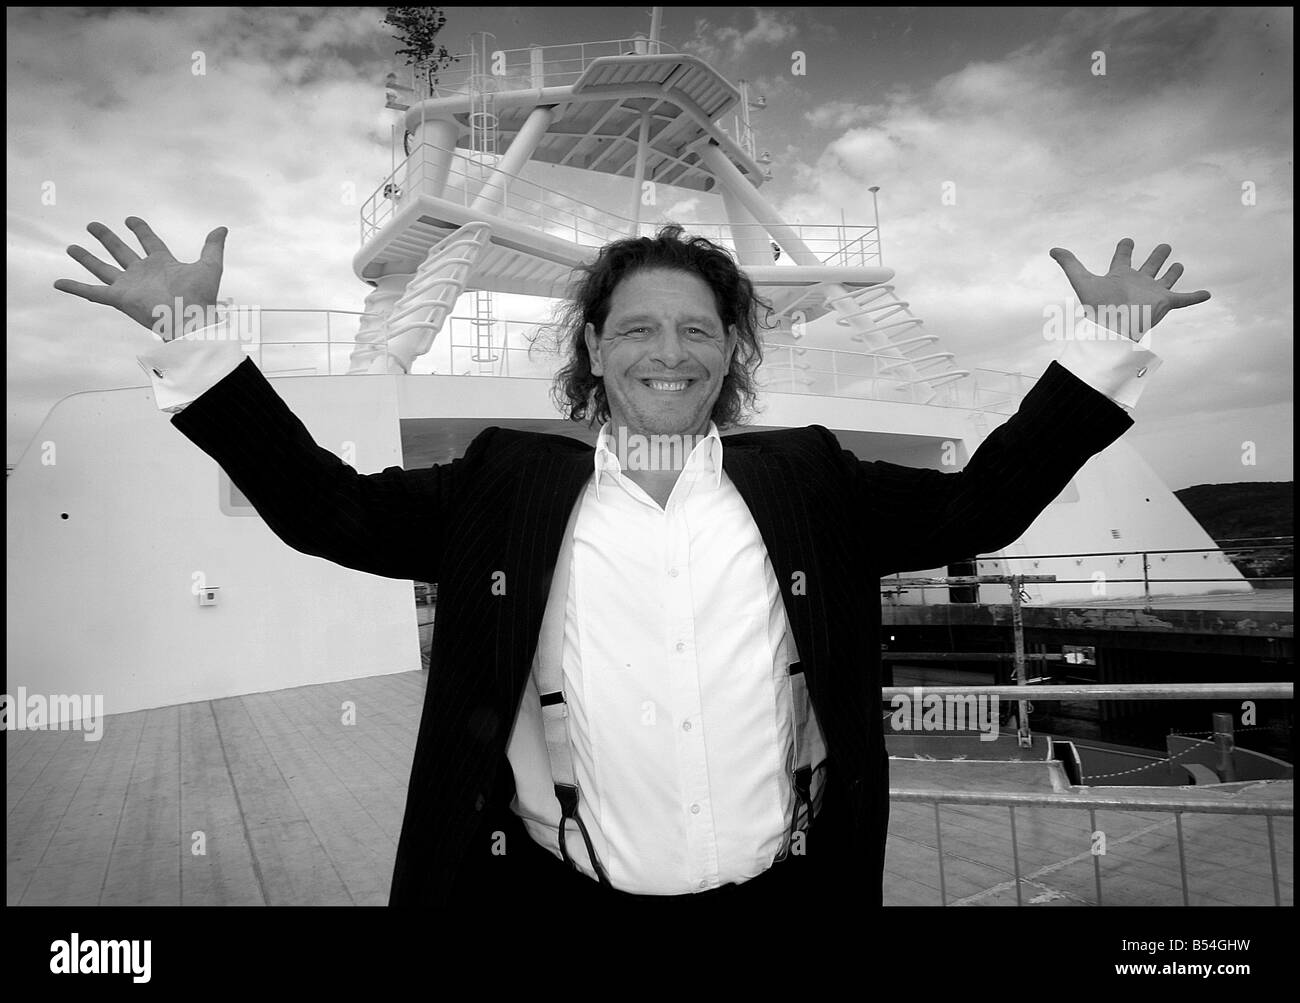 Marco Pierre White Chef and Restauranteur June 2007 on the new P O Cruise liner Ventura Celebrity Chef Marco Pierre White is on Stock Photo